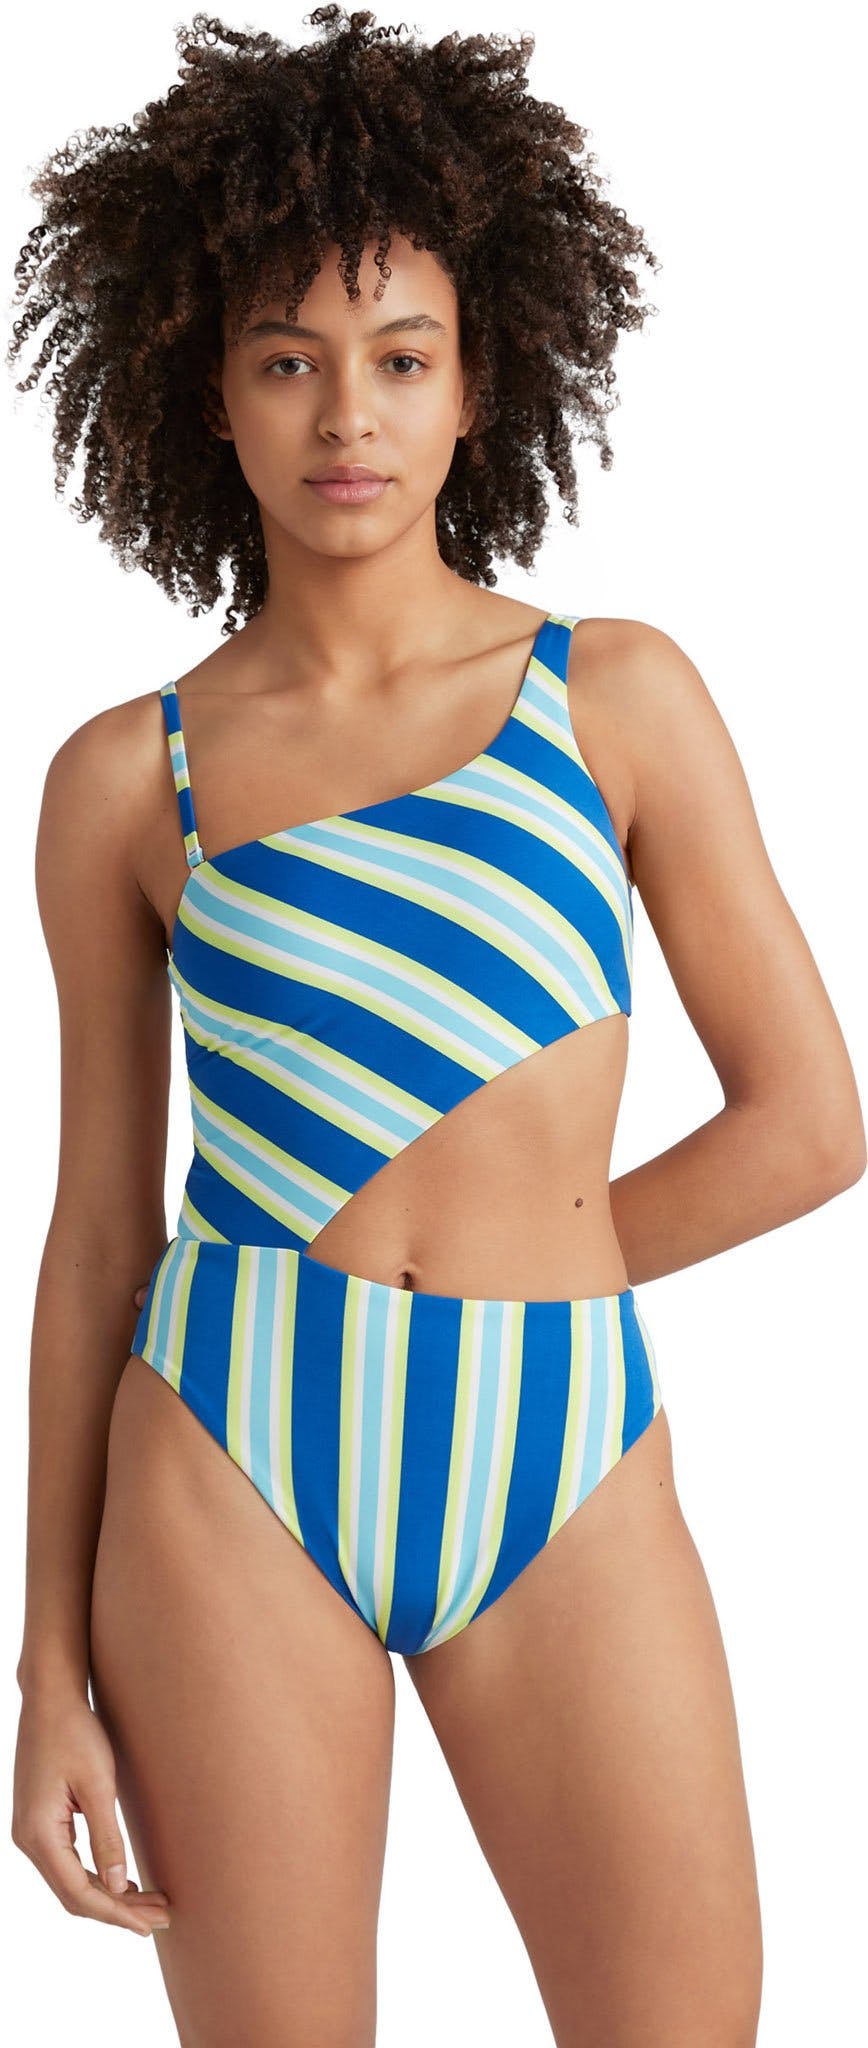 Product image for Poppy Swimsuit - Women's